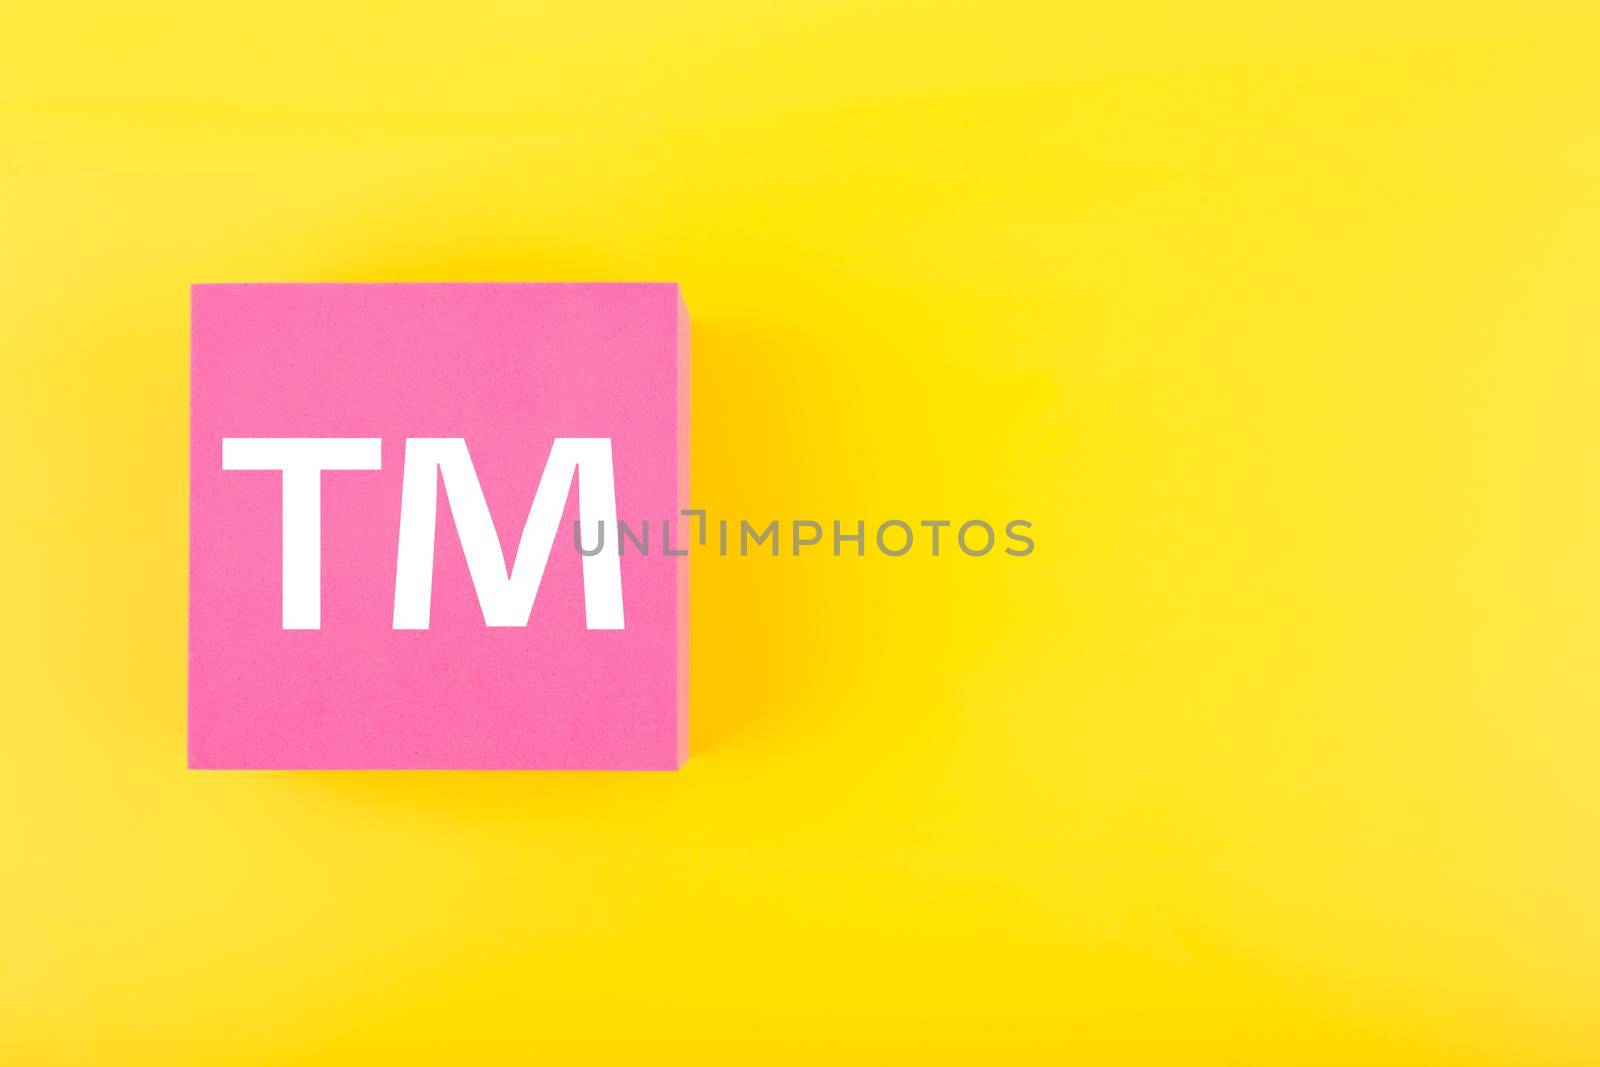 TM trademark sign on pink figure on yellow background with copy space. Concept of intellectual property registration and protection